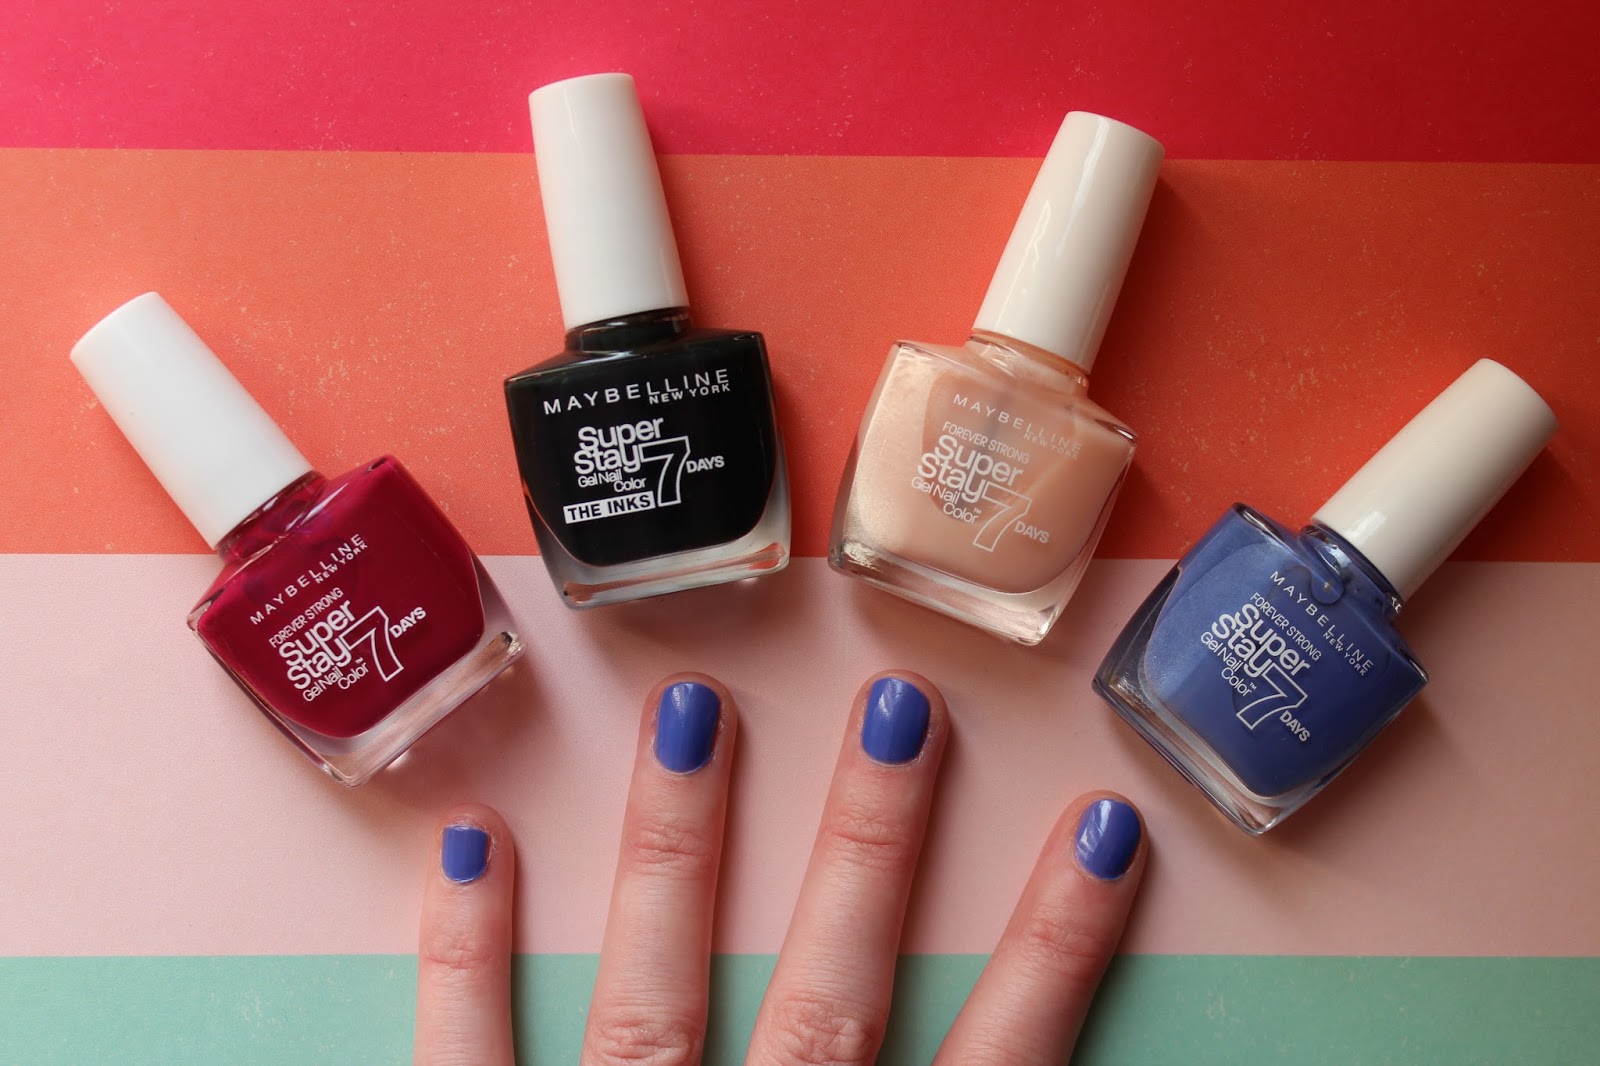 maybelline super stay gel nail colour polish varnish divine wine french manicure surreal emerald excess nails nail summer 7 days beauty blogger bblogger bloggers recommendations notd instagram boots promotion tutorial